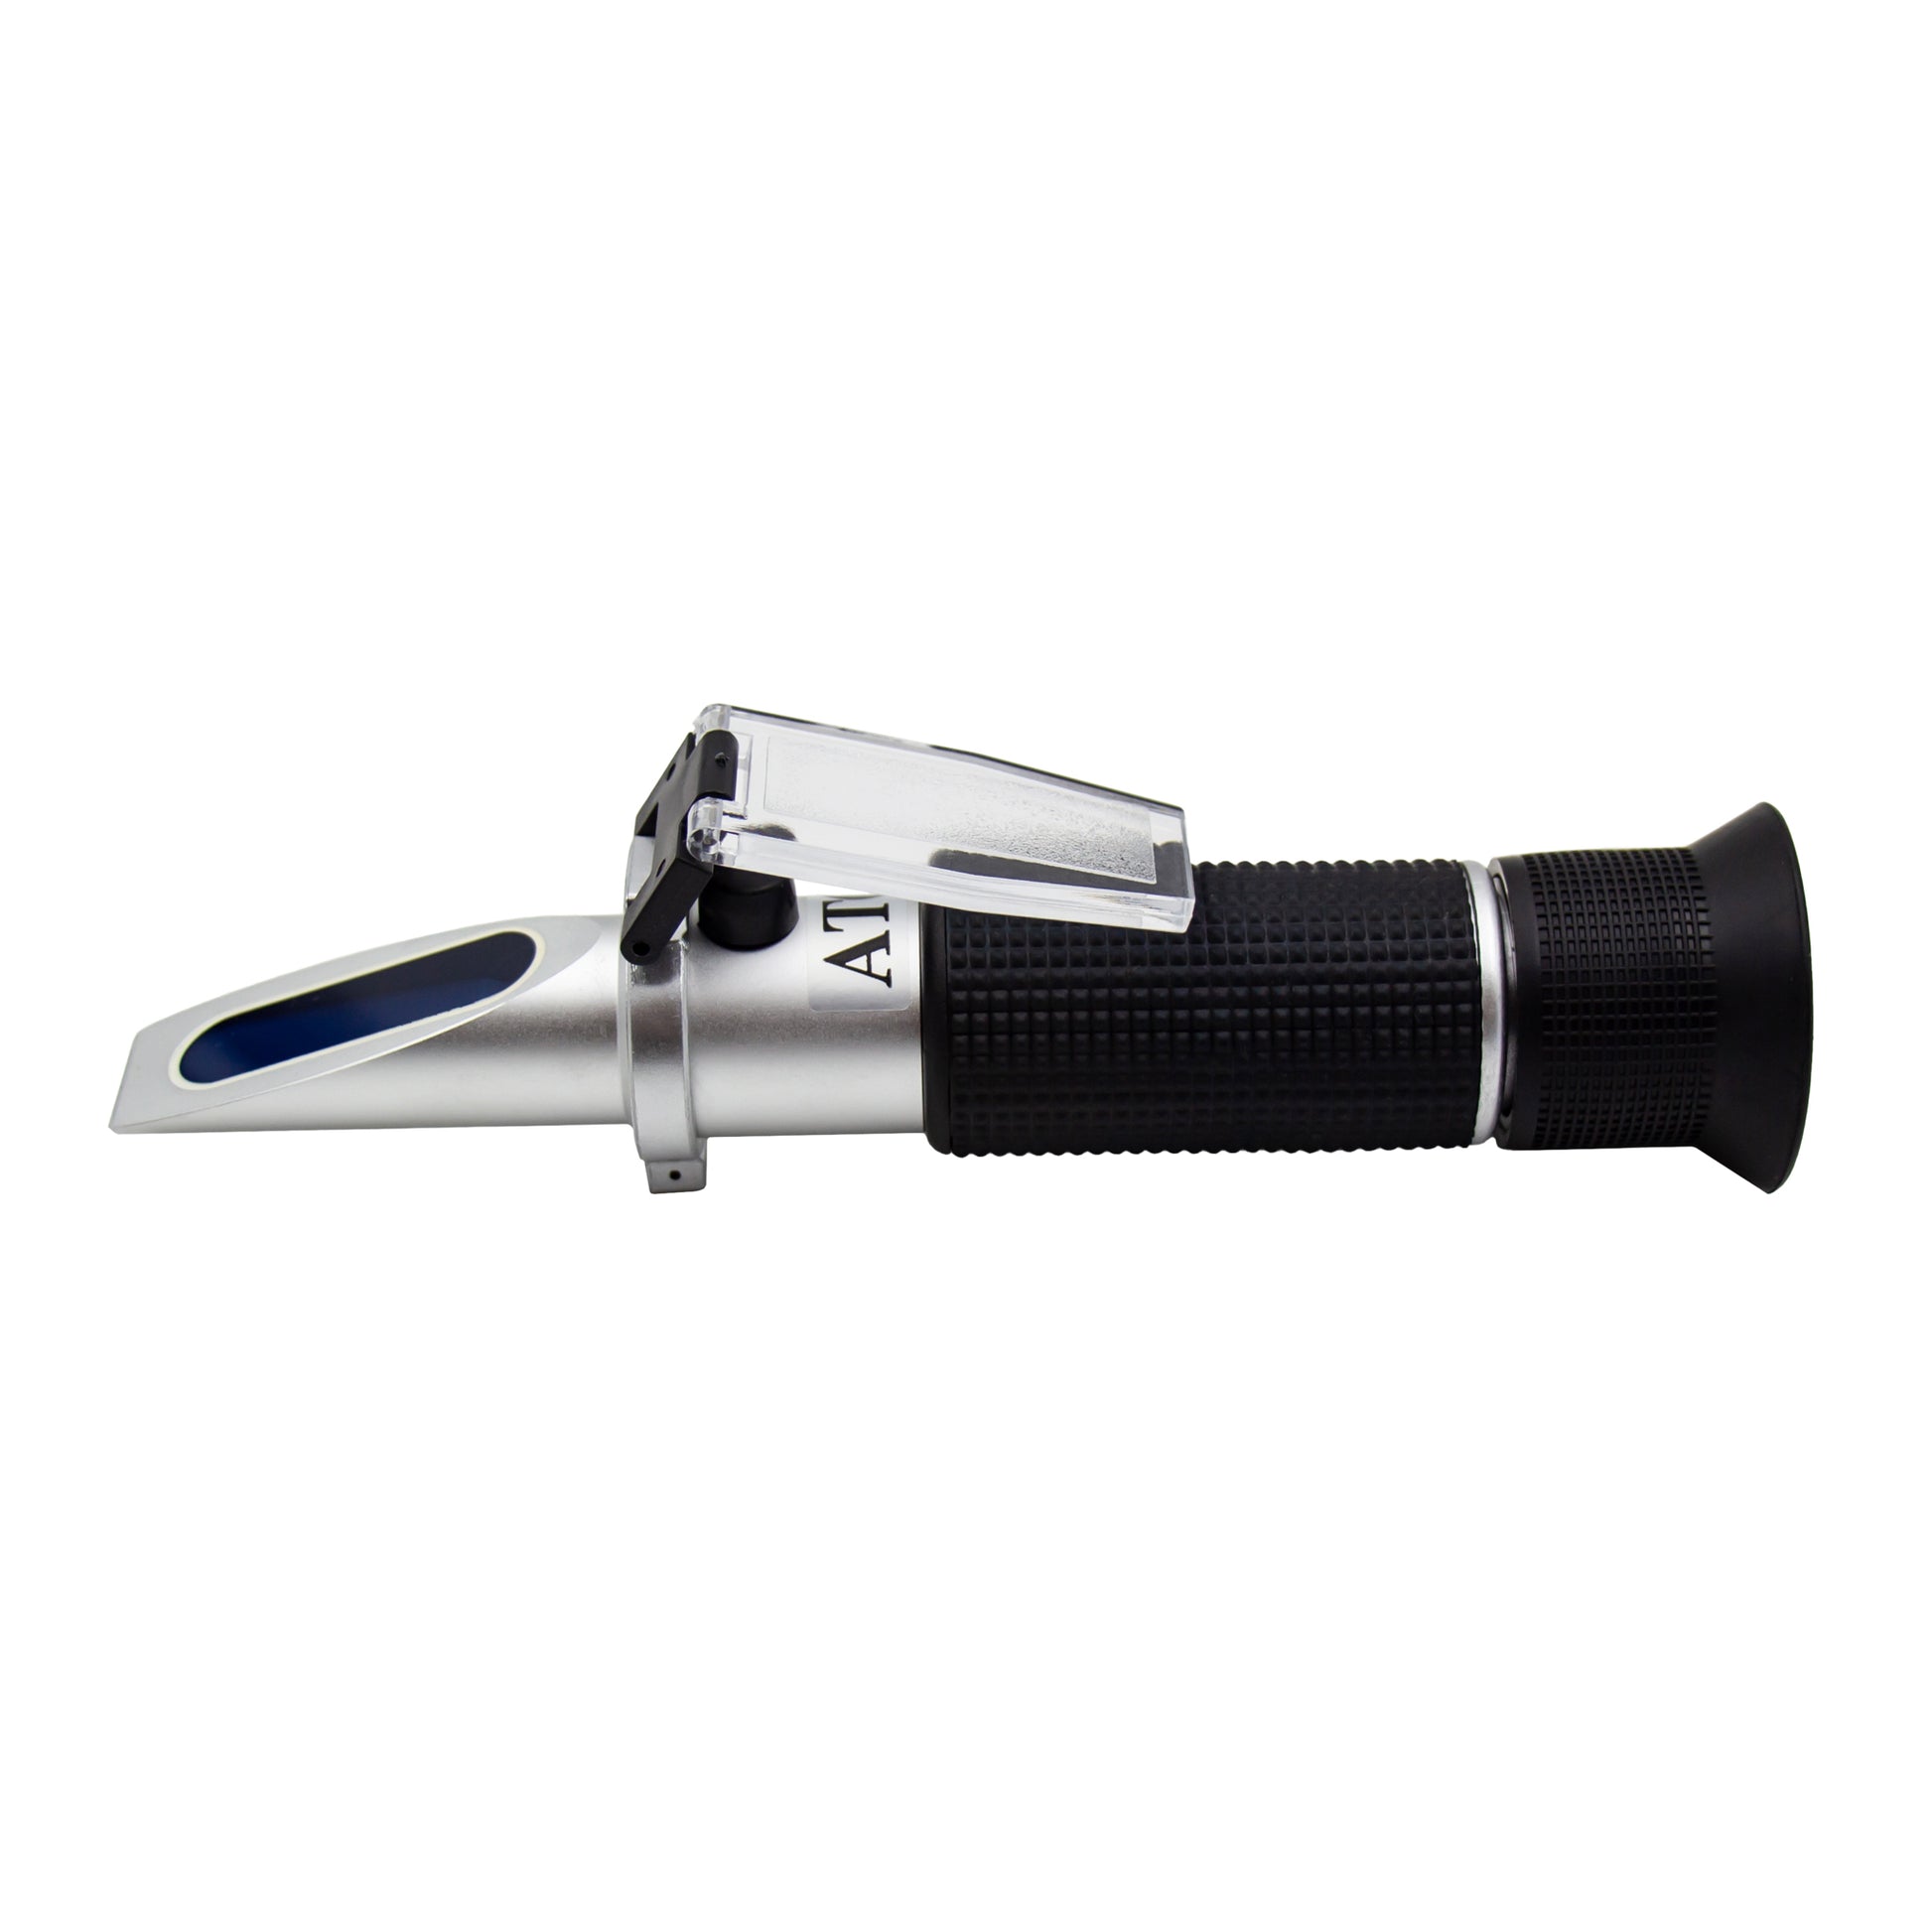 hand held refractometer used in home brewing